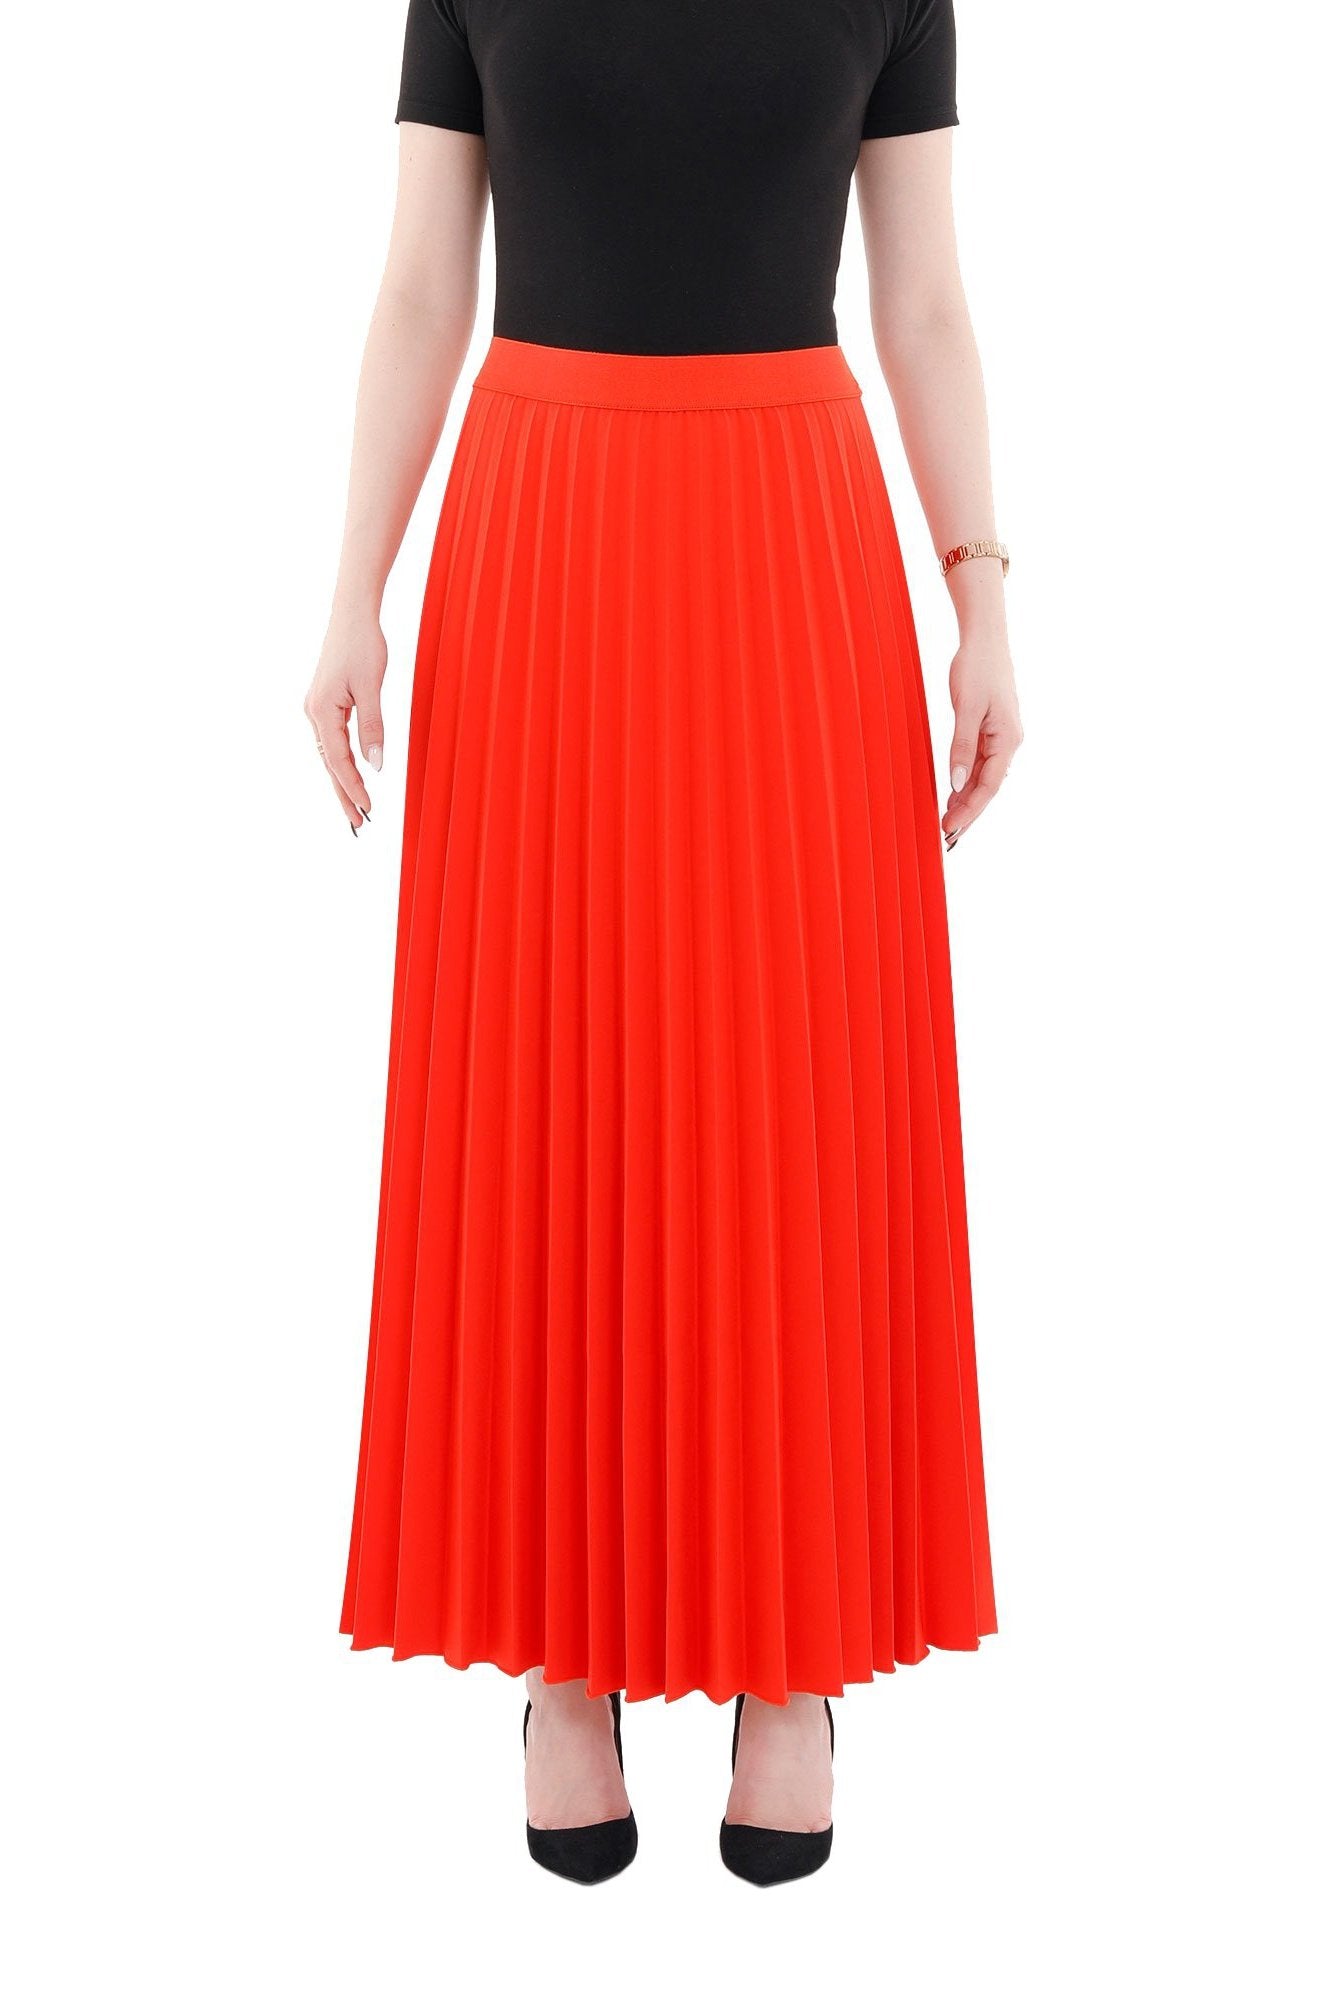 Shop Coral Pleated Maxi Skirt with Elastic Waistband